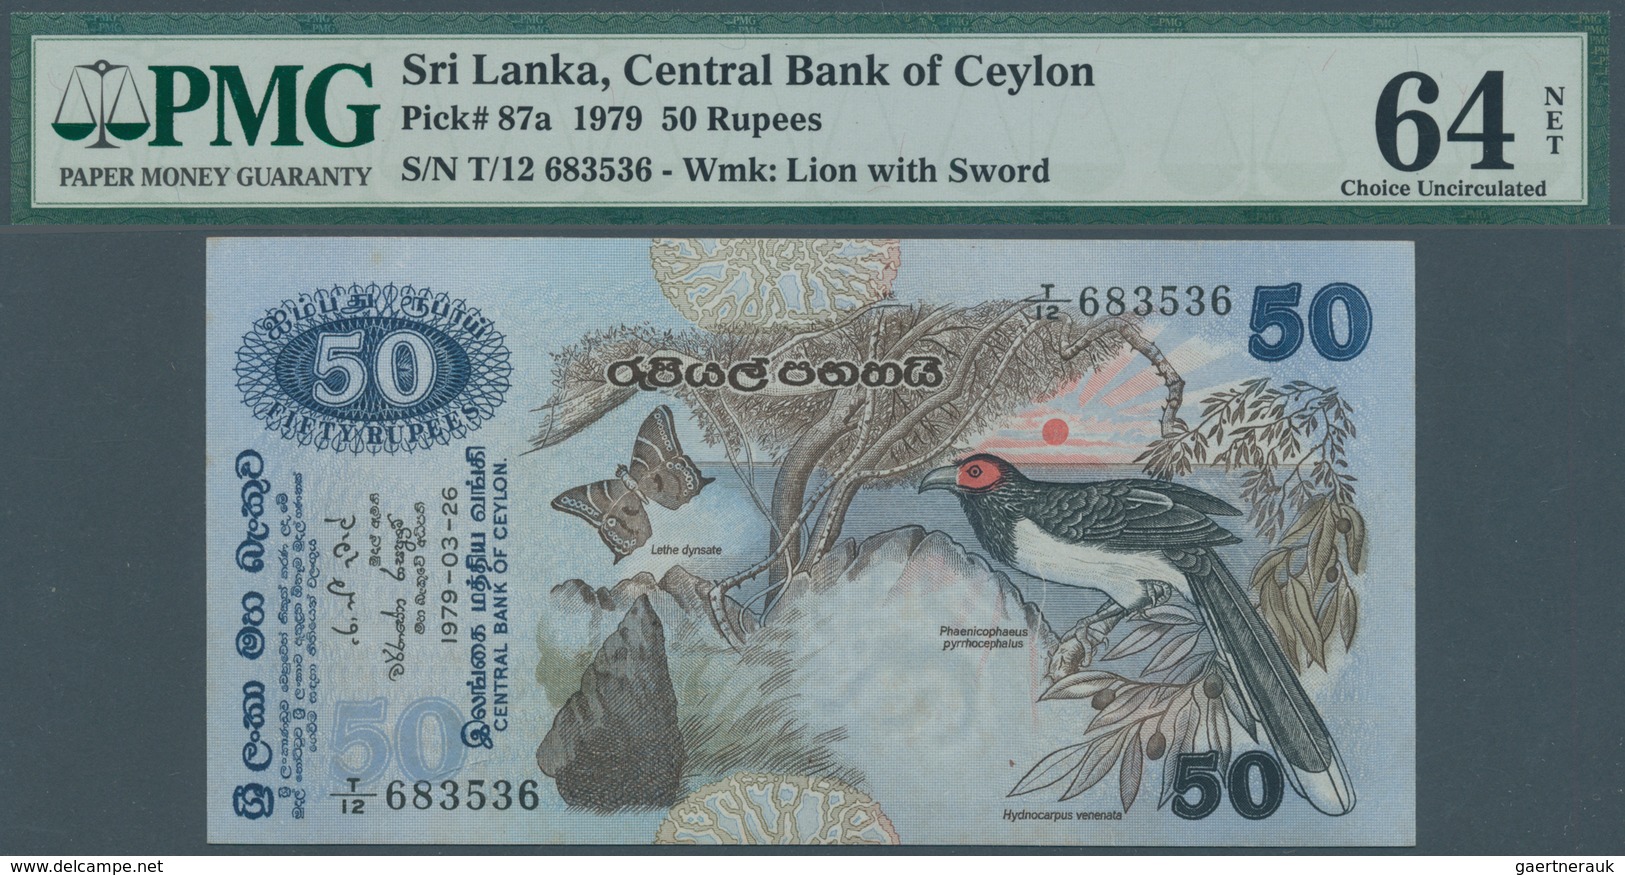 02441 Sri Lanka: Set Of 3 Notes Containing 5, 10 And 50 Rupees 1979 P. 84, 85, 87, All 3 PMG Graded As 64 - Sri Lanka